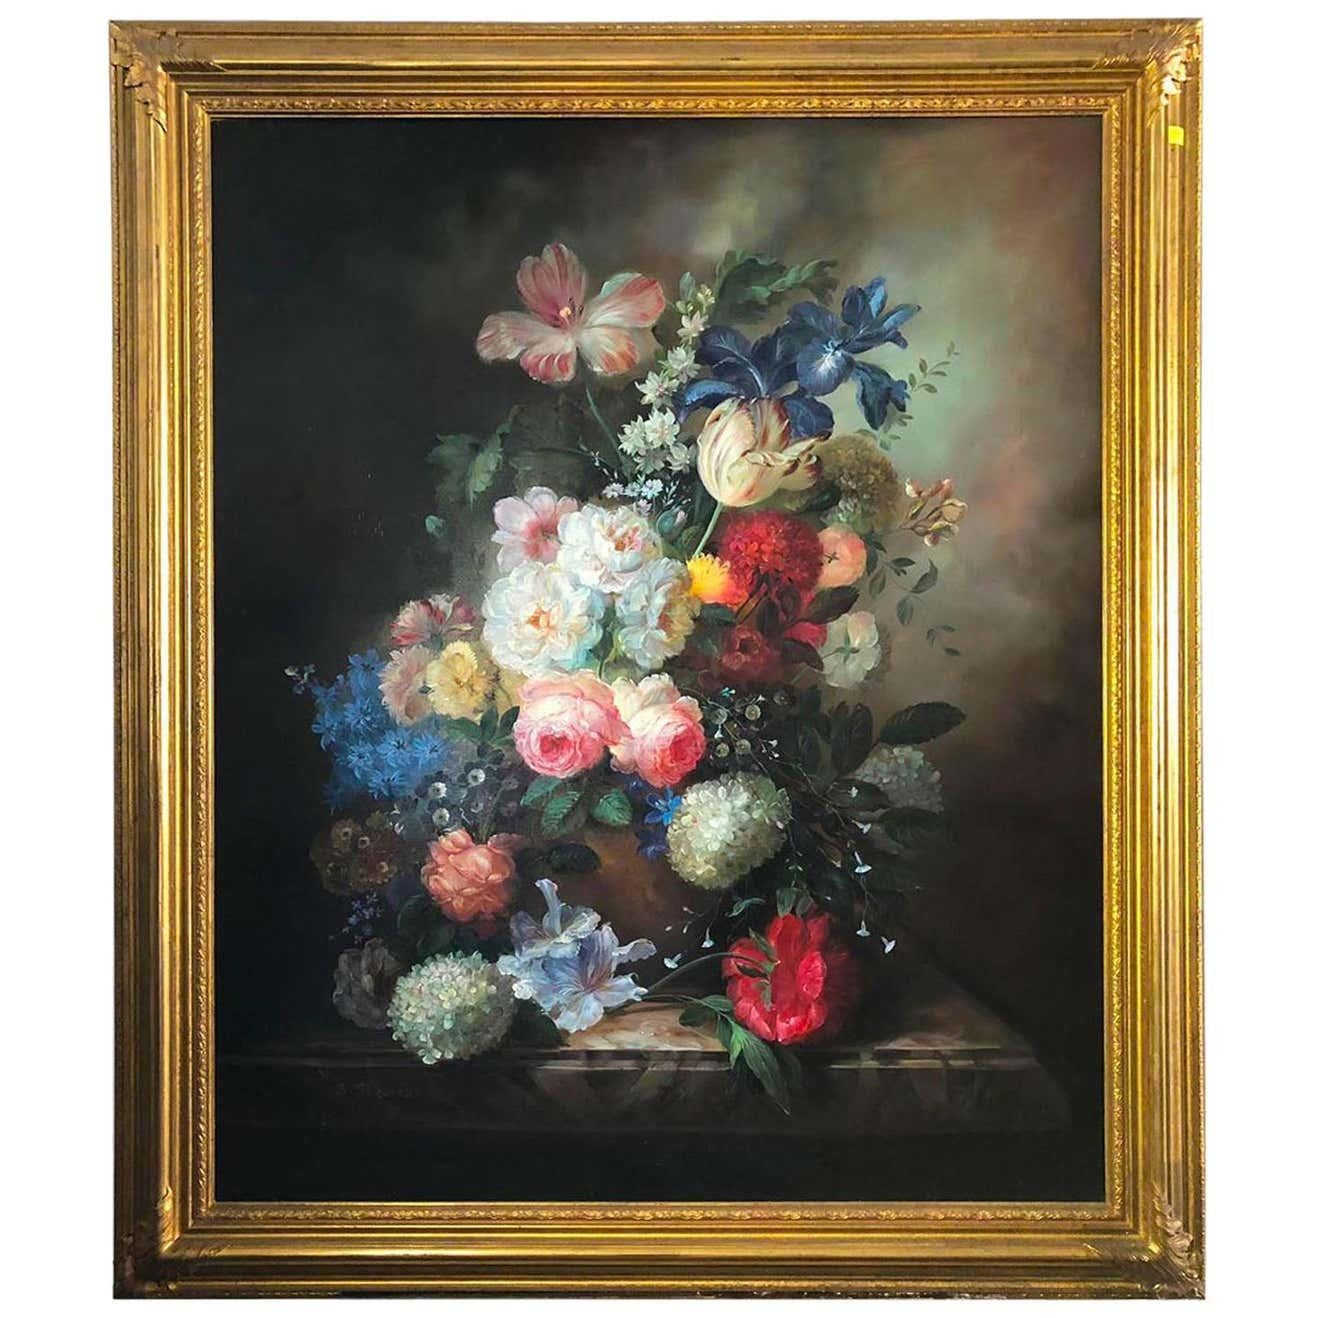 Bouquet of carnations still life, signed by S.Pecora 20th century “Multi-Petal” Roses, Hyacinths, “Coronary” Anemones, Scarlet Catryophyllaceae and Convolvulaceaous plants in an embossed metal vase”. Oil on canvas. Notes on the artist: S.Pecora